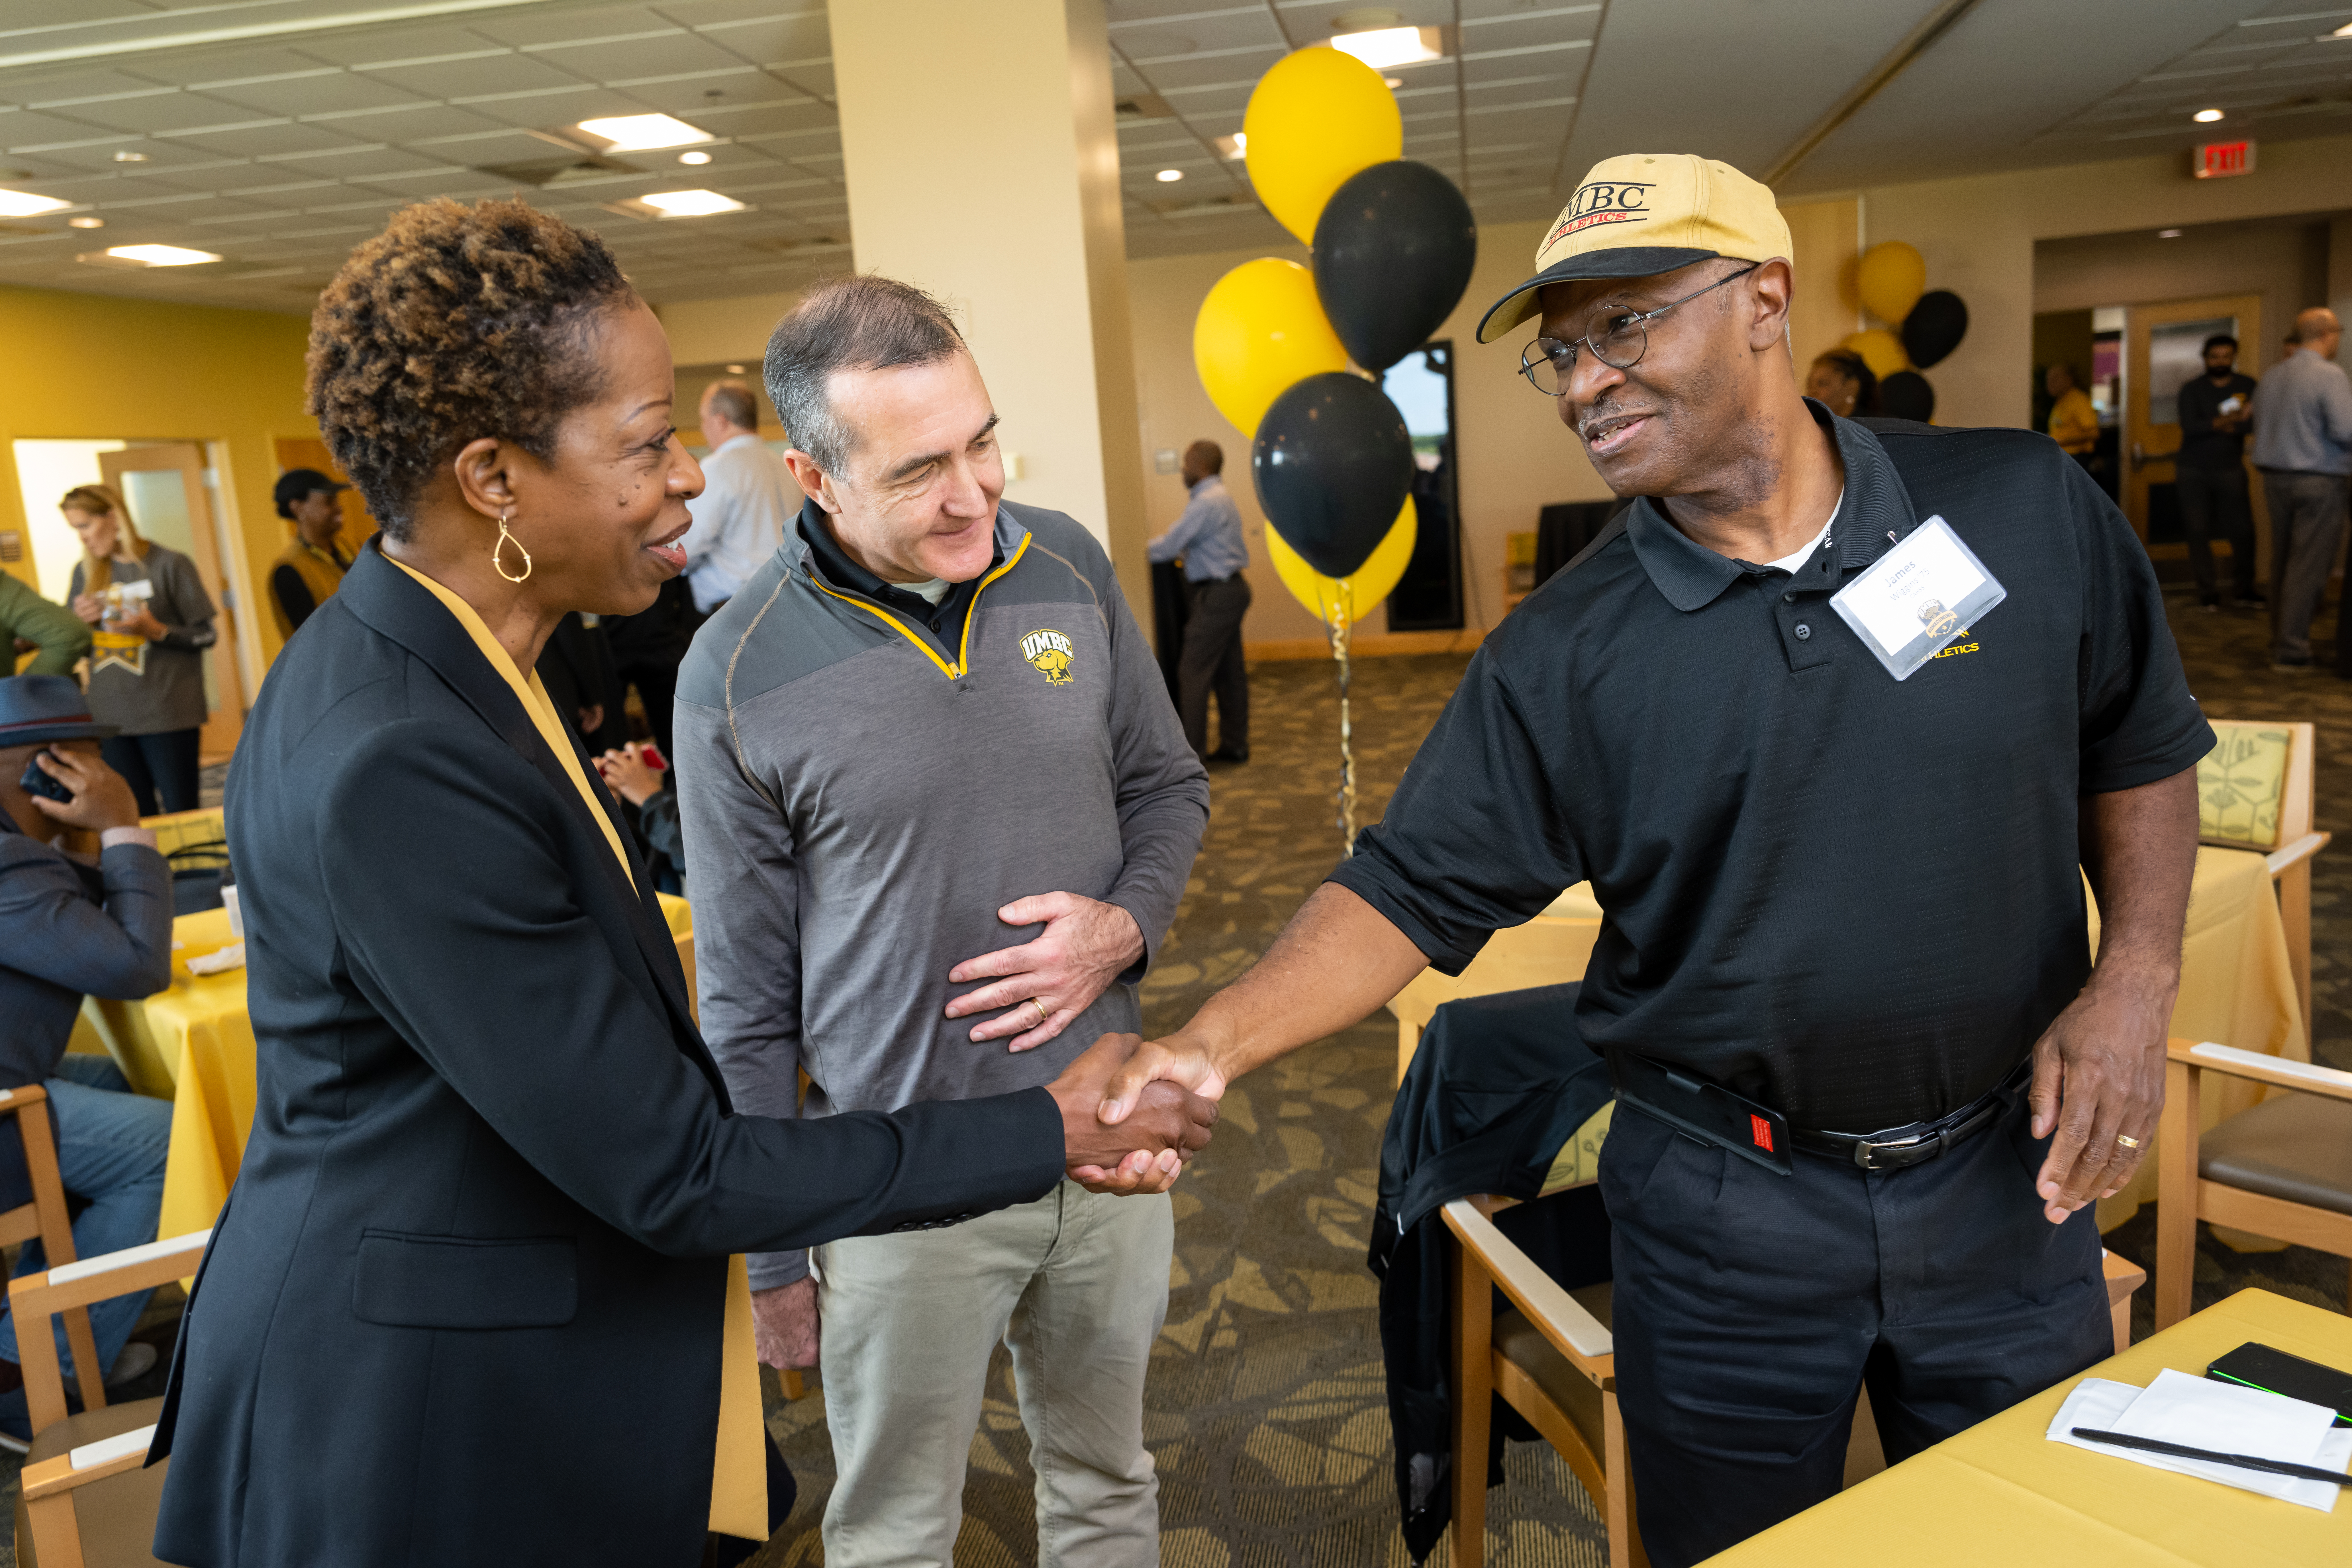 Dr. Sheares Ashby shakes hand with an alumnus.